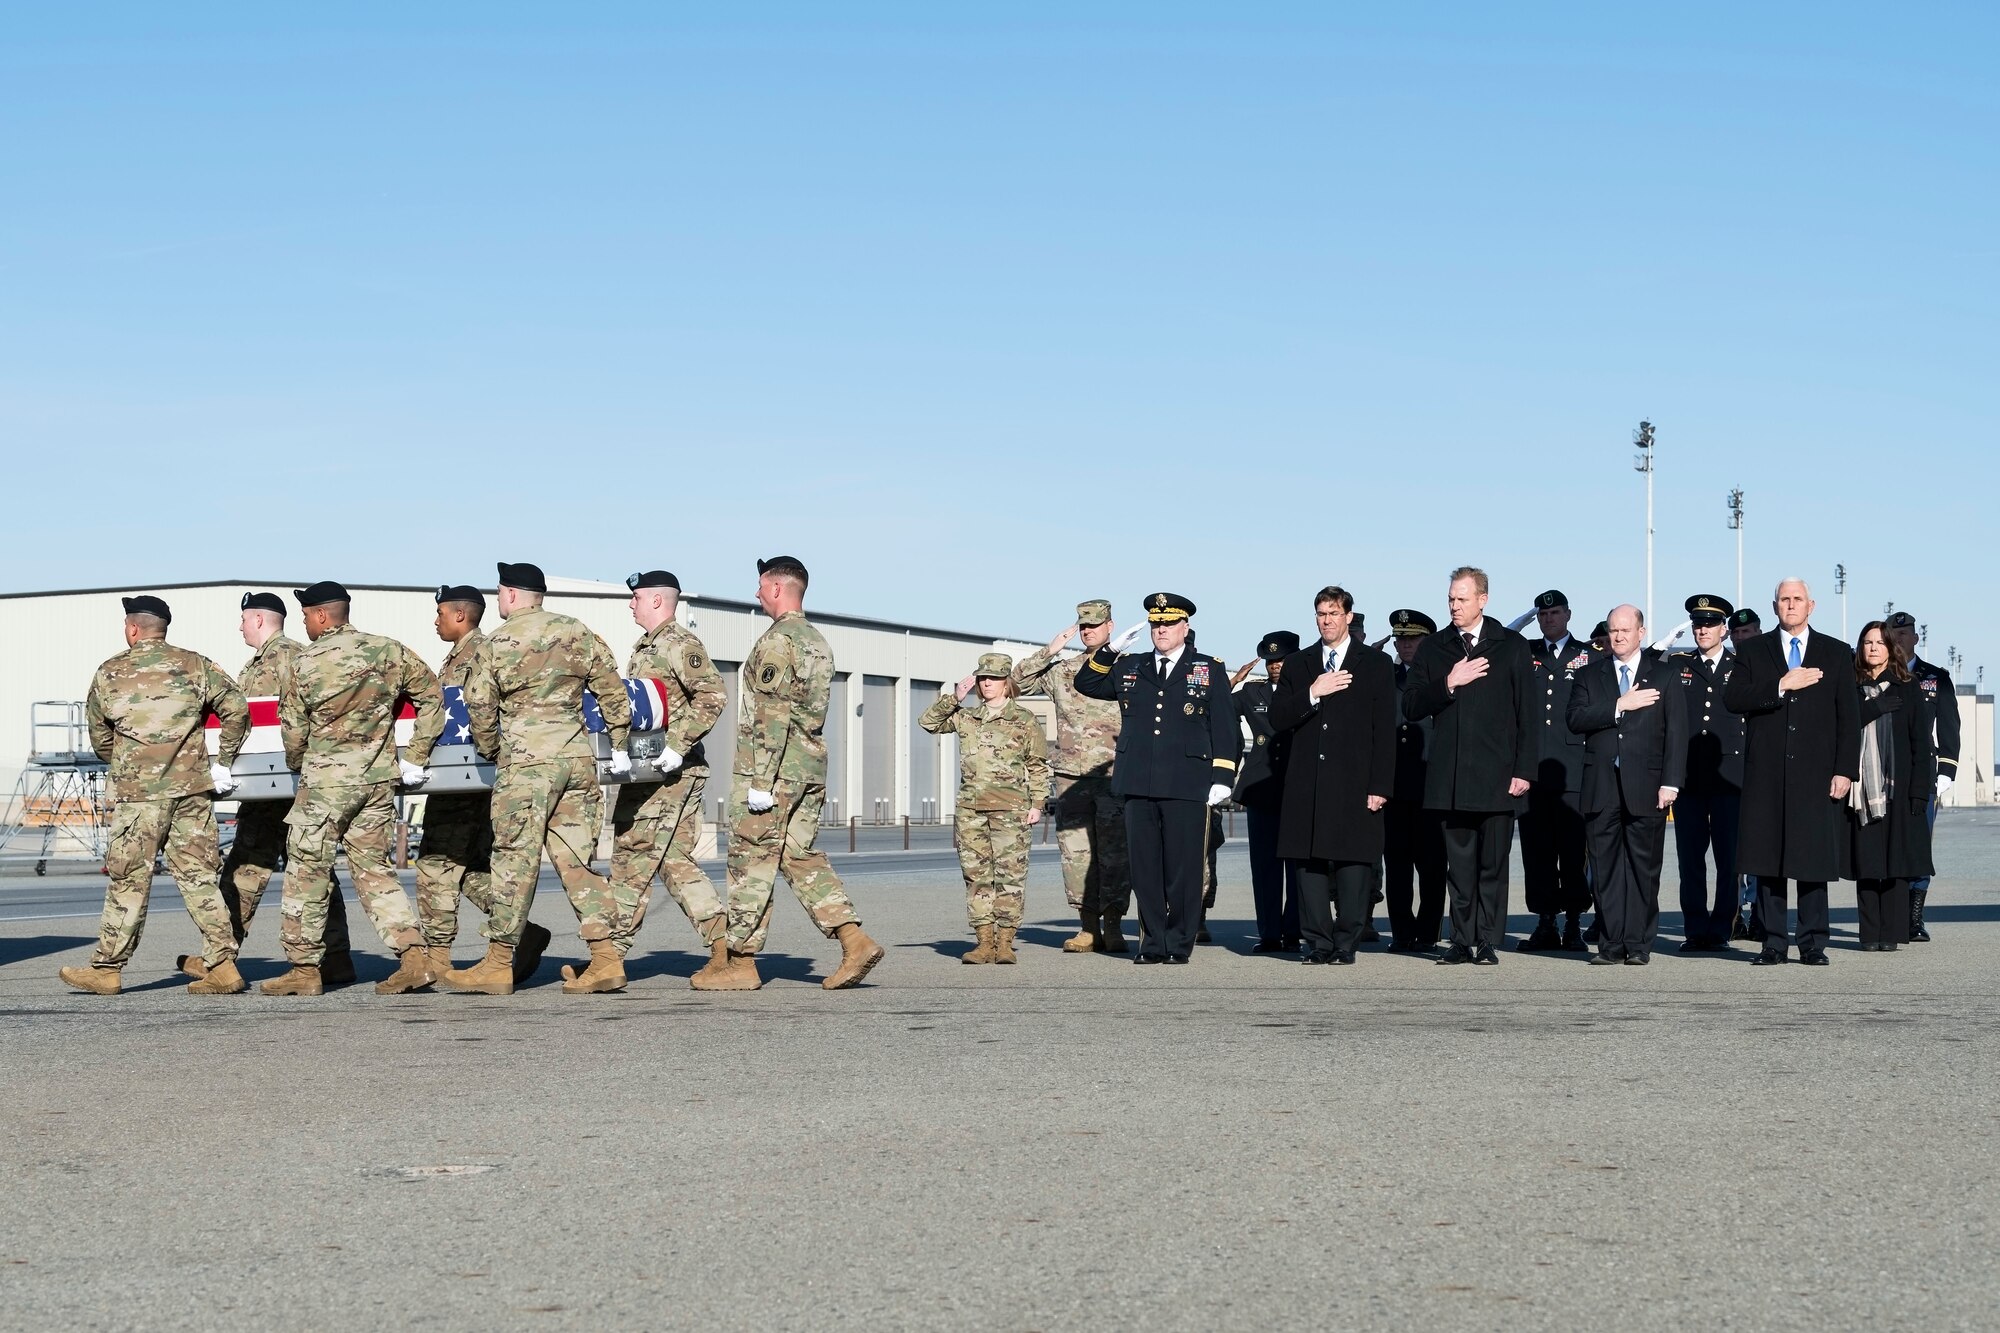 A U.S. Army carry team transfers the remains of Spc. Joseph P. Collette of Lancaster, Ohio, during a dignified transfer March 24, 2019, on Dover Air Force Base, Del.